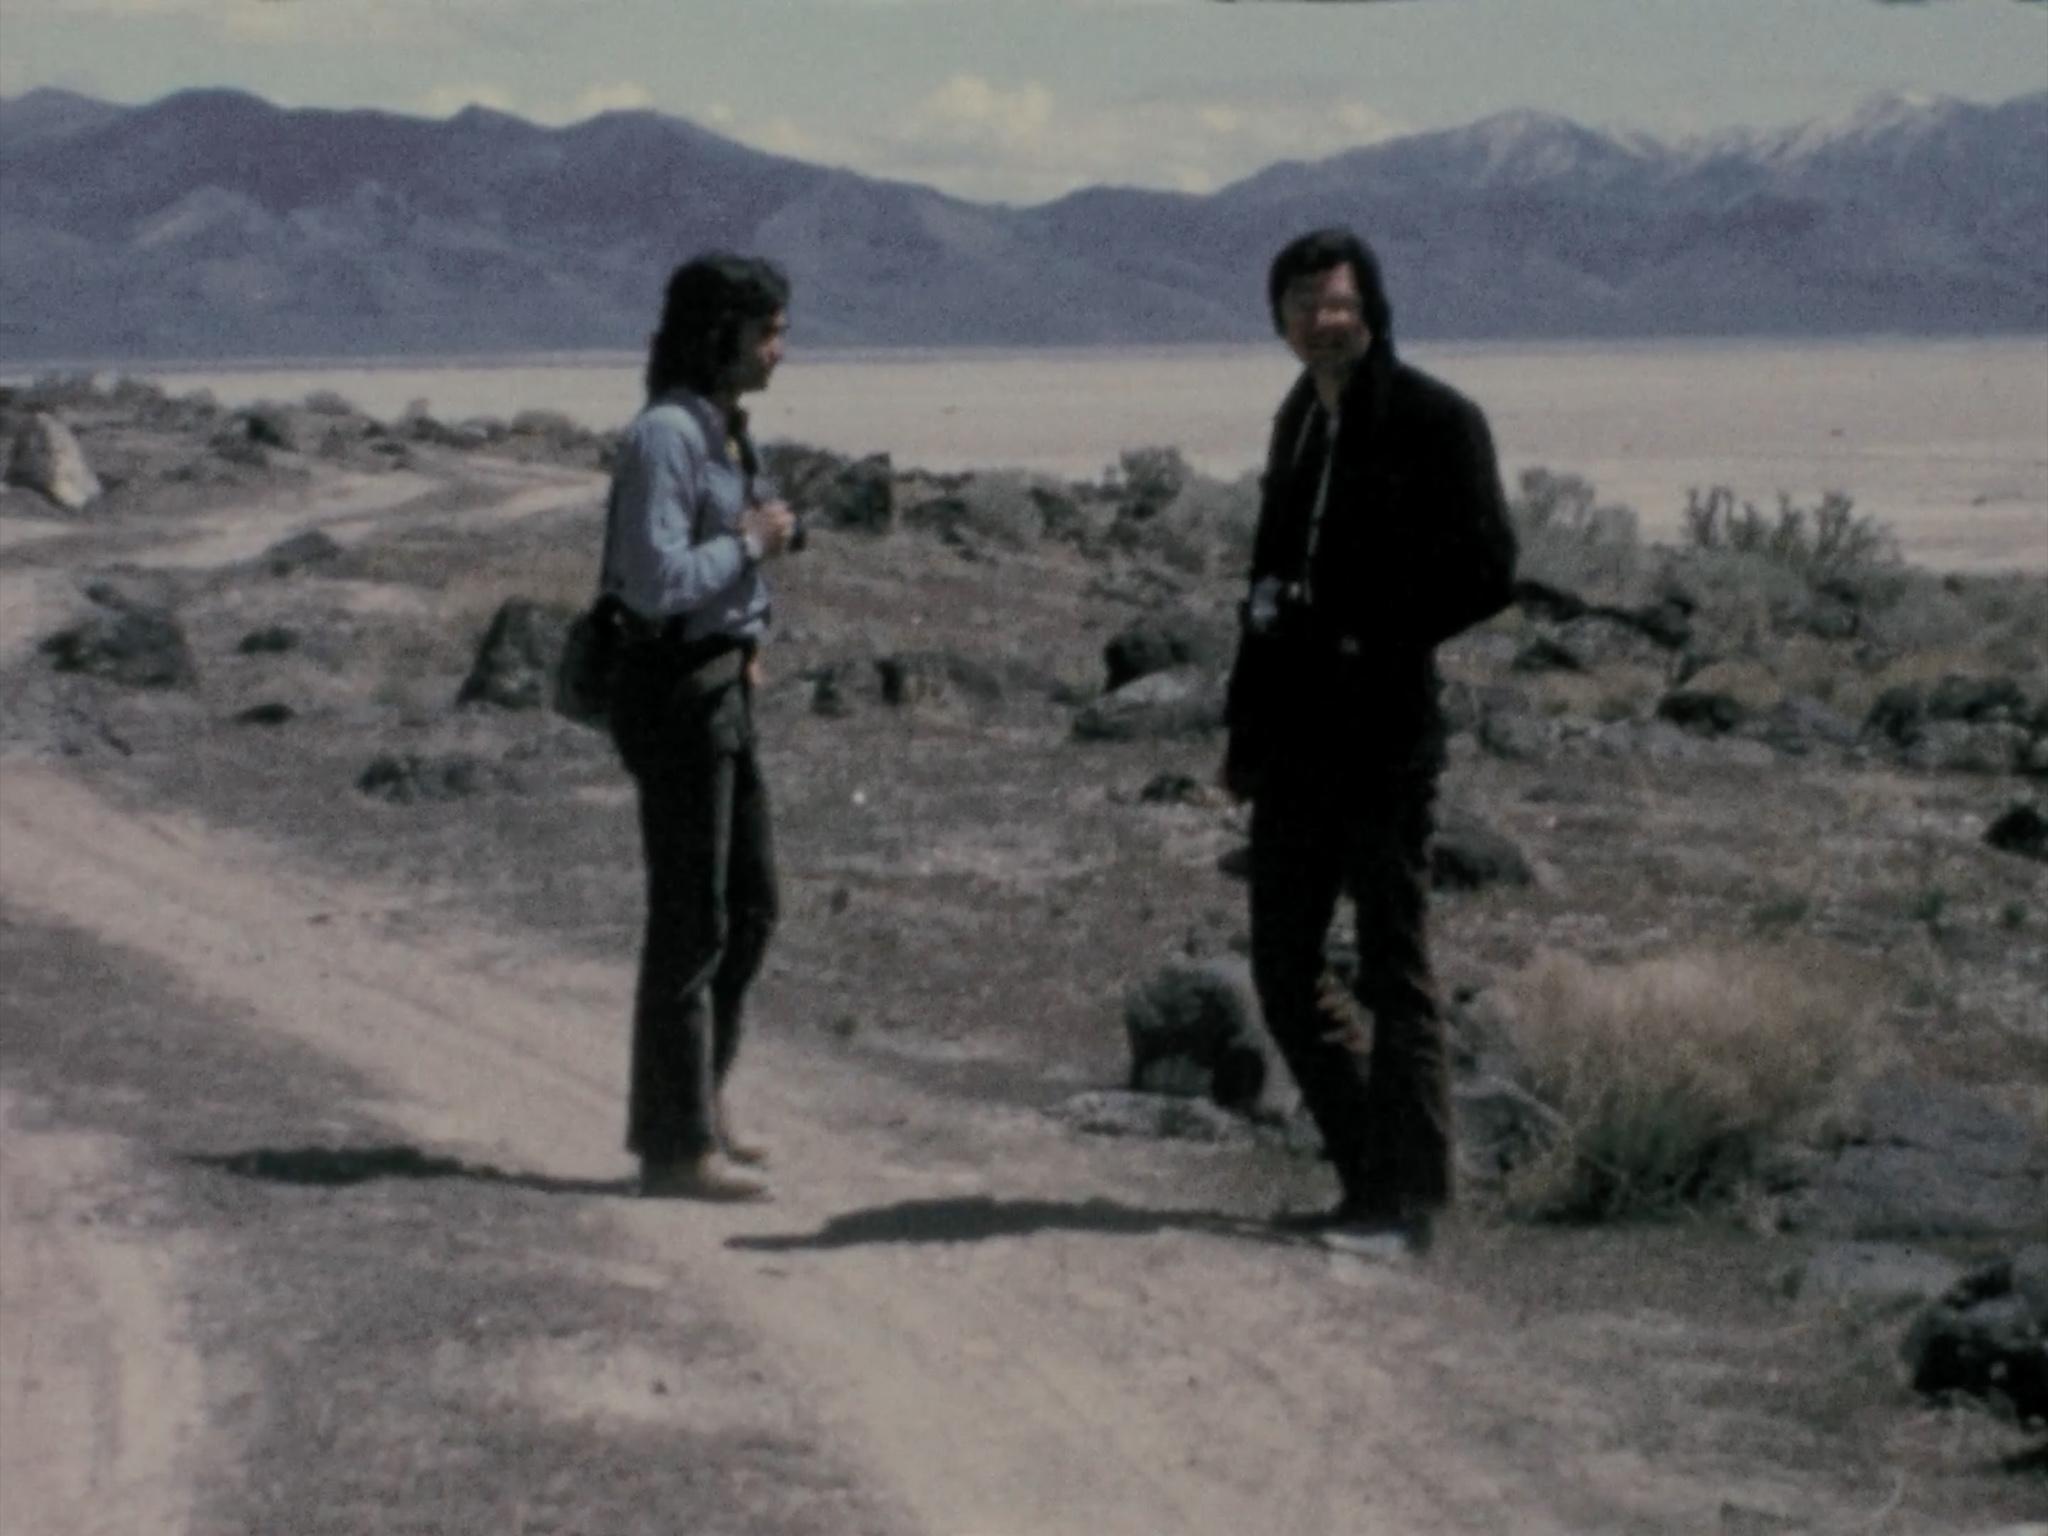 Two figures standing on a dirt road with mountains in the background